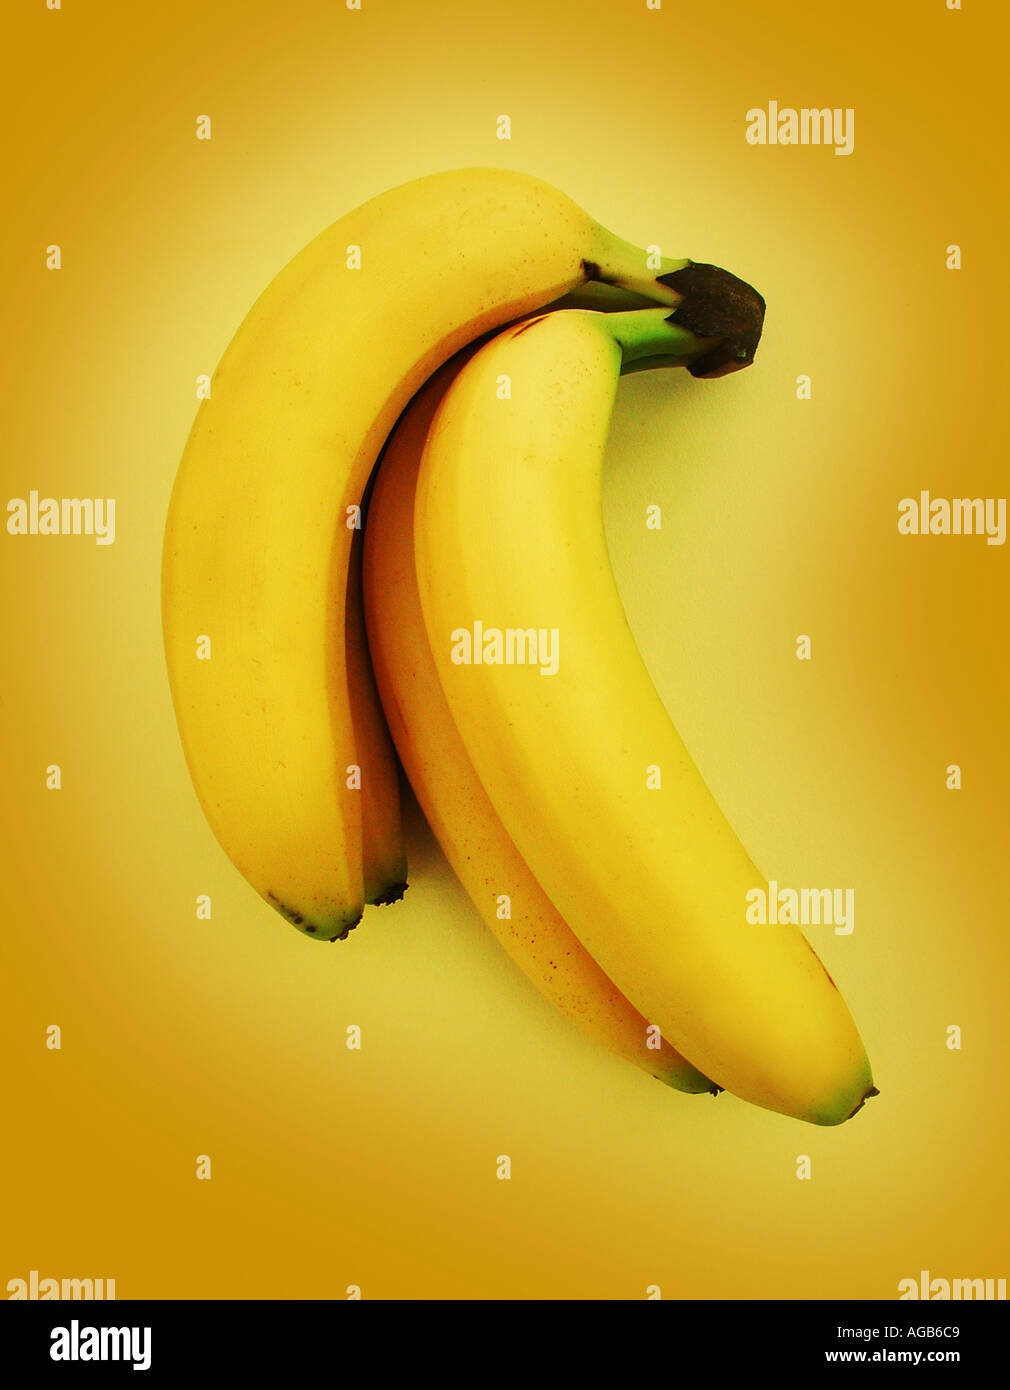 A bunch of bananas on yellow background Stock Photo